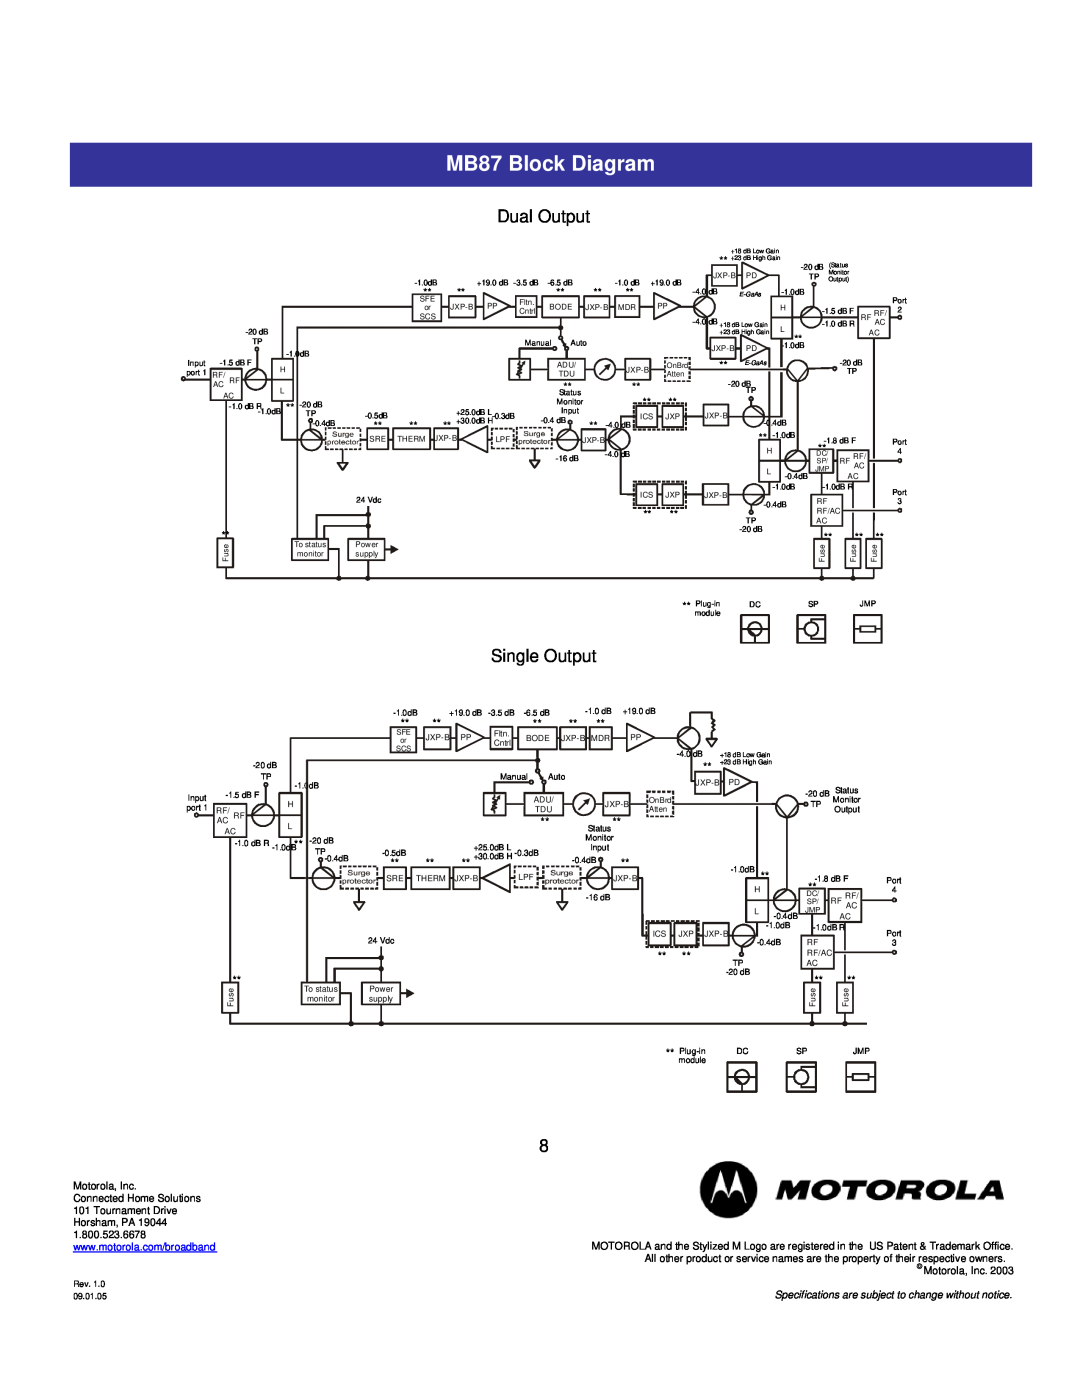 Motorola specifications MB87 Block Diagram, Dual Output, Single Output 